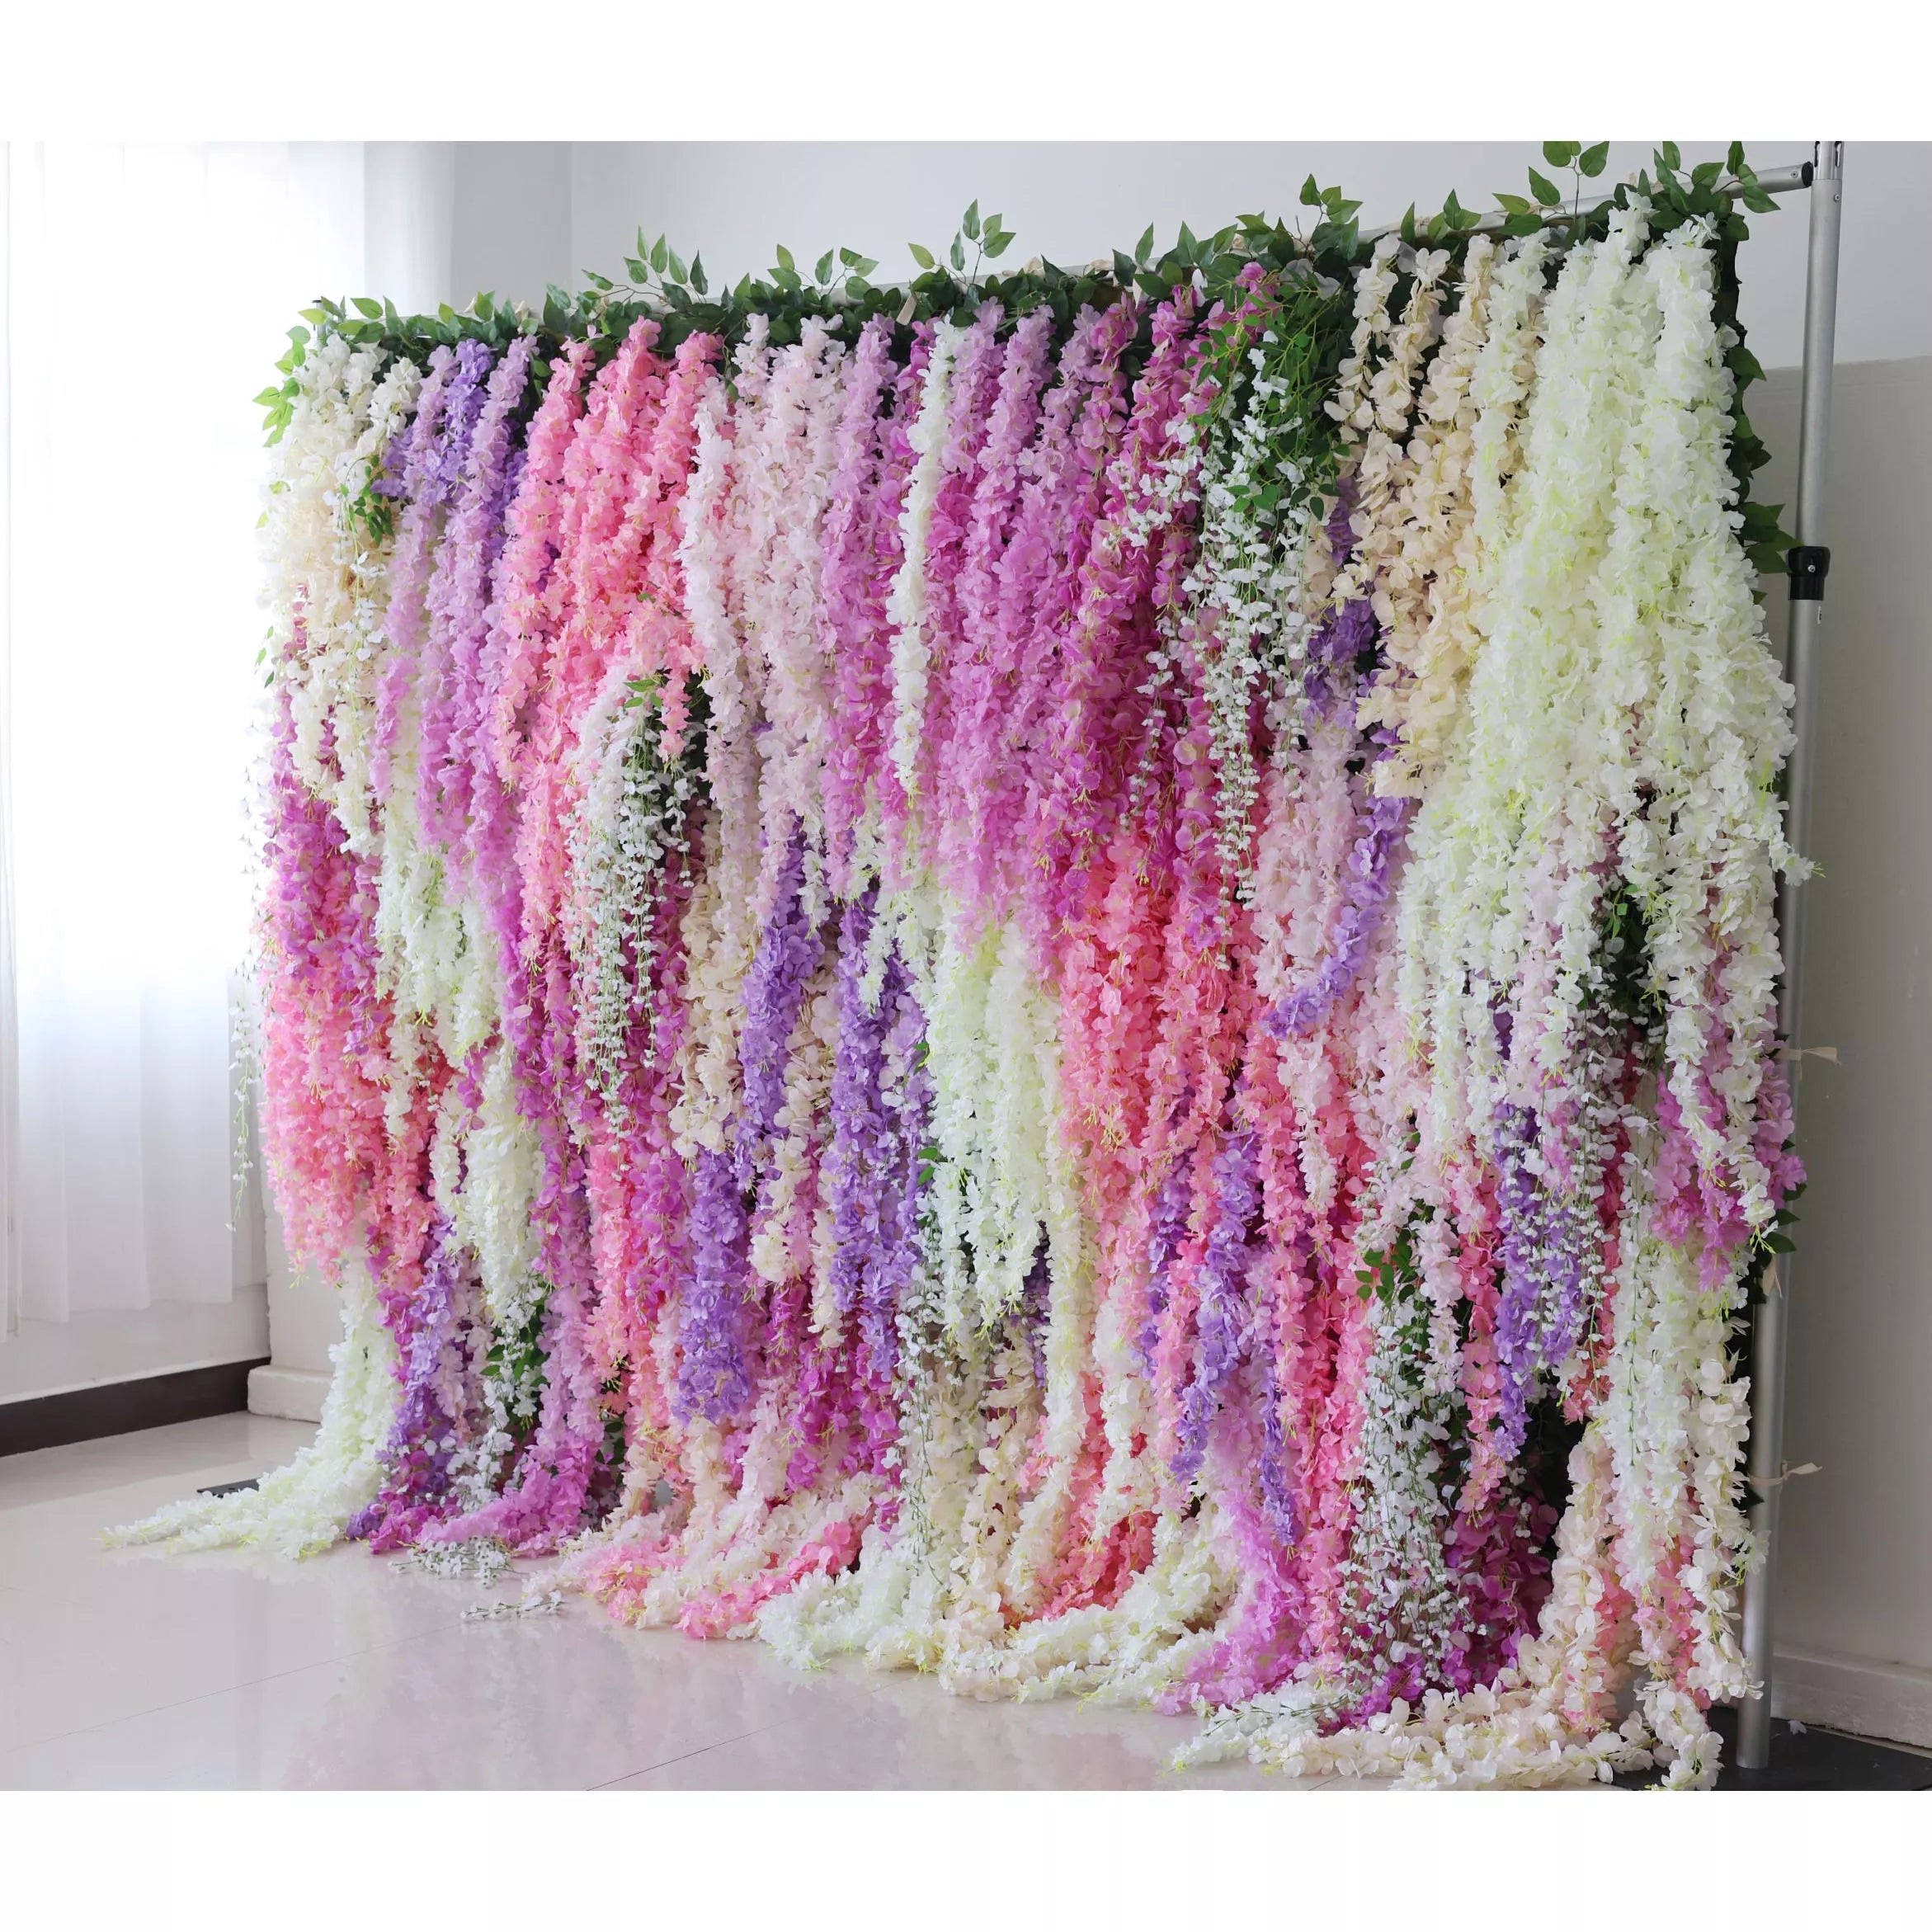 ValarFlower Artificial Floral Wall Backdrop: Cascading Wisteria Wonderland - A Symphony of Pastels-VF-278